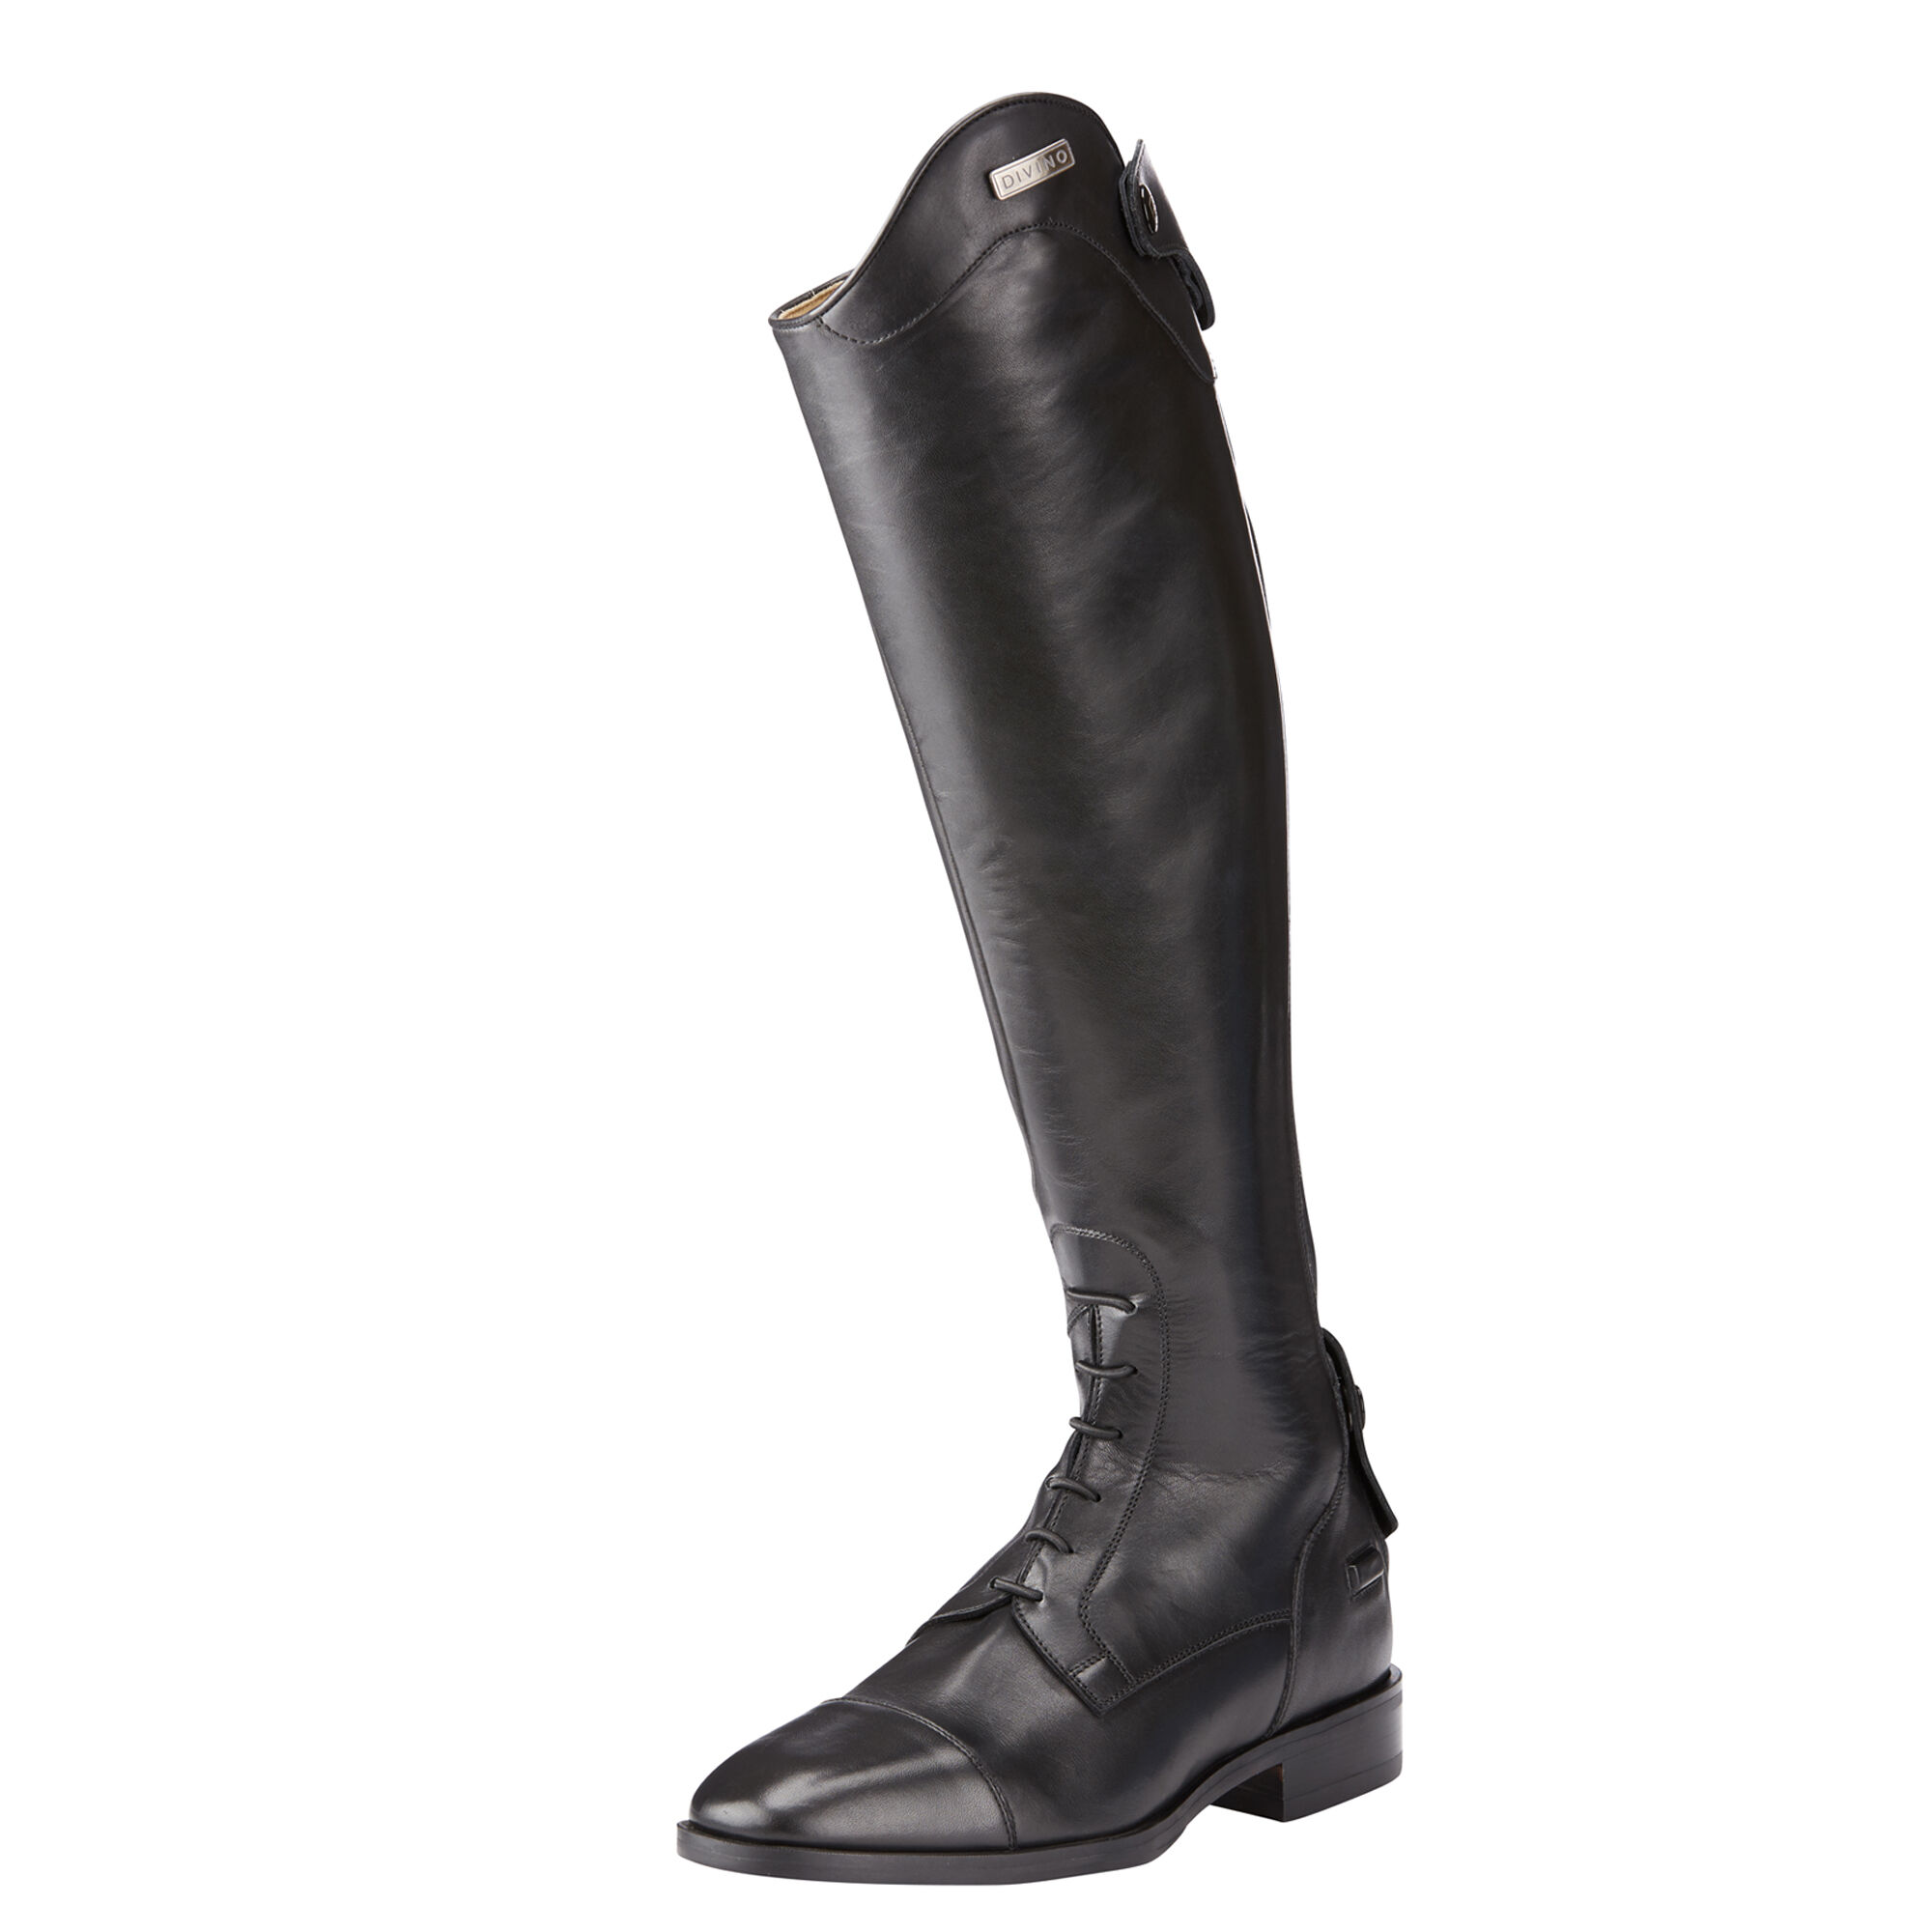 Women's Divino Tall Riding Boots in Black Calf Leather  Regular by Ariat